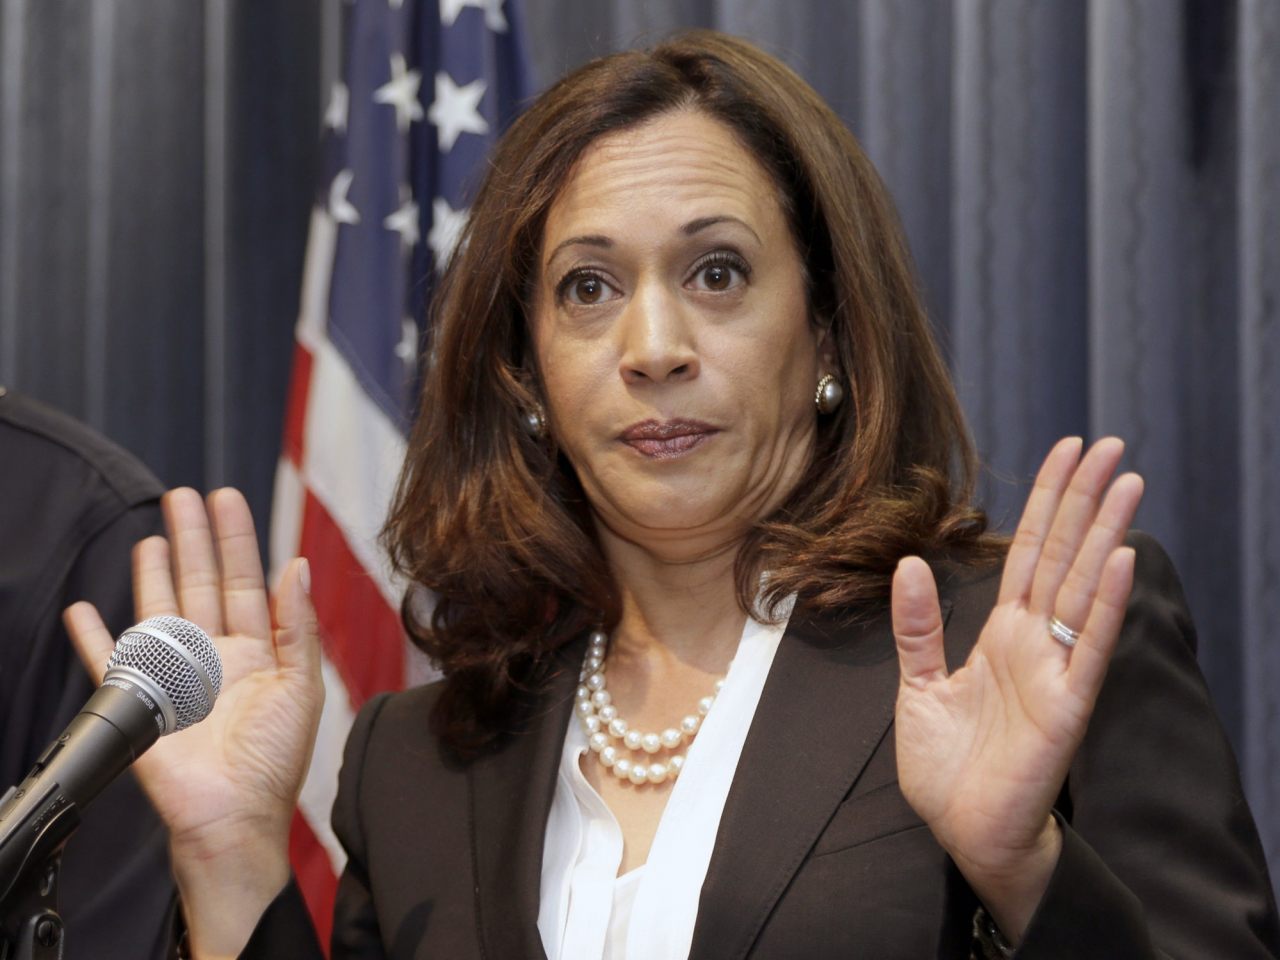 Kamala Harris accused of keeping blacks jailed to provide “slave wage labor” to the state of California